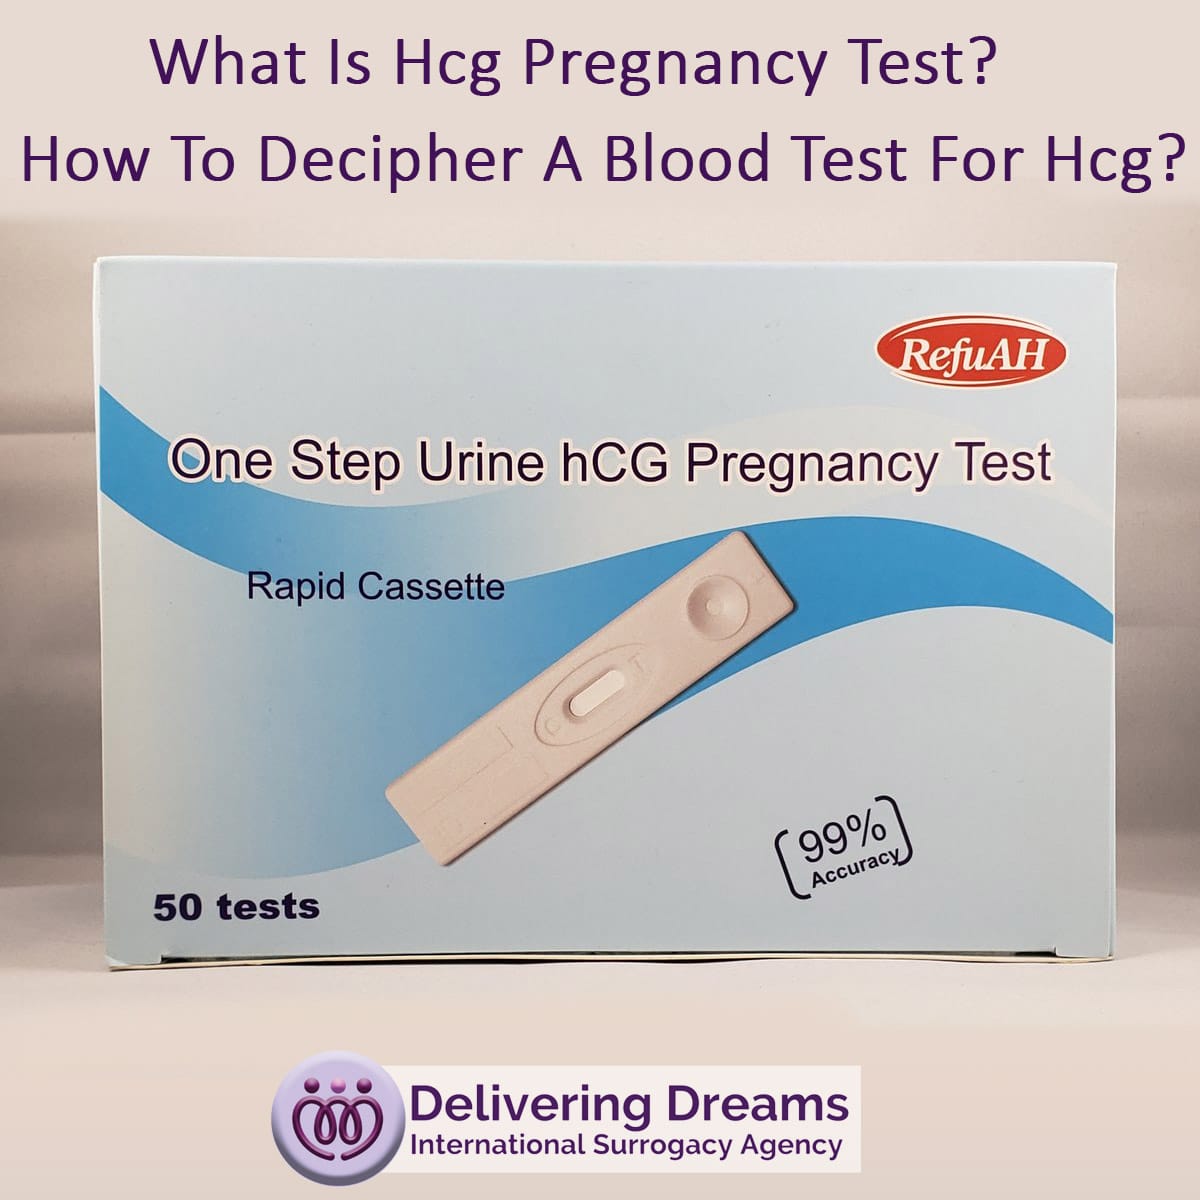 What Is Hcg Pregnancy Test?